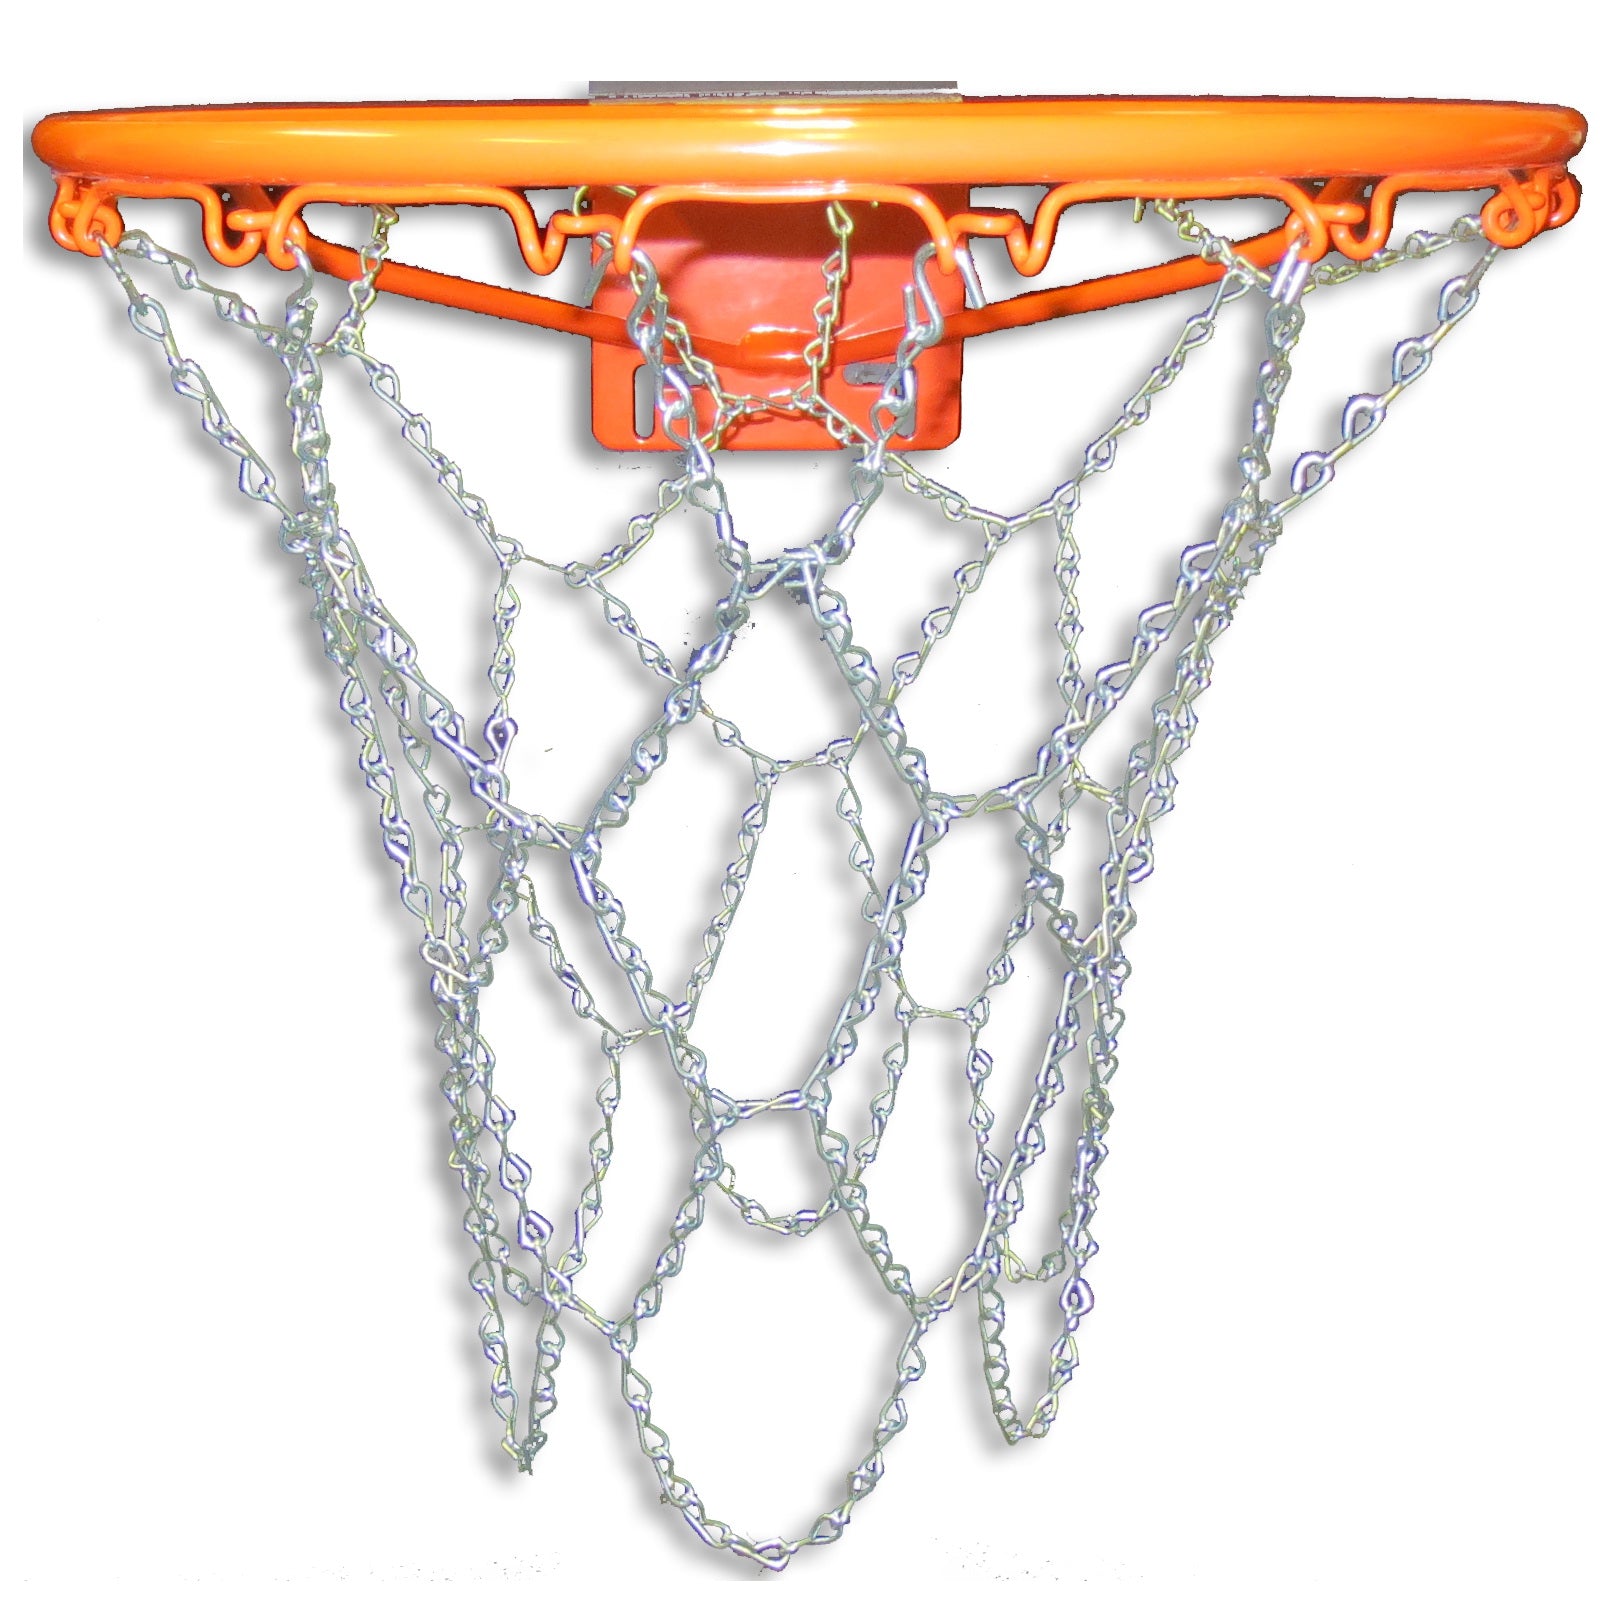 gared chain basketball net for traditional rim